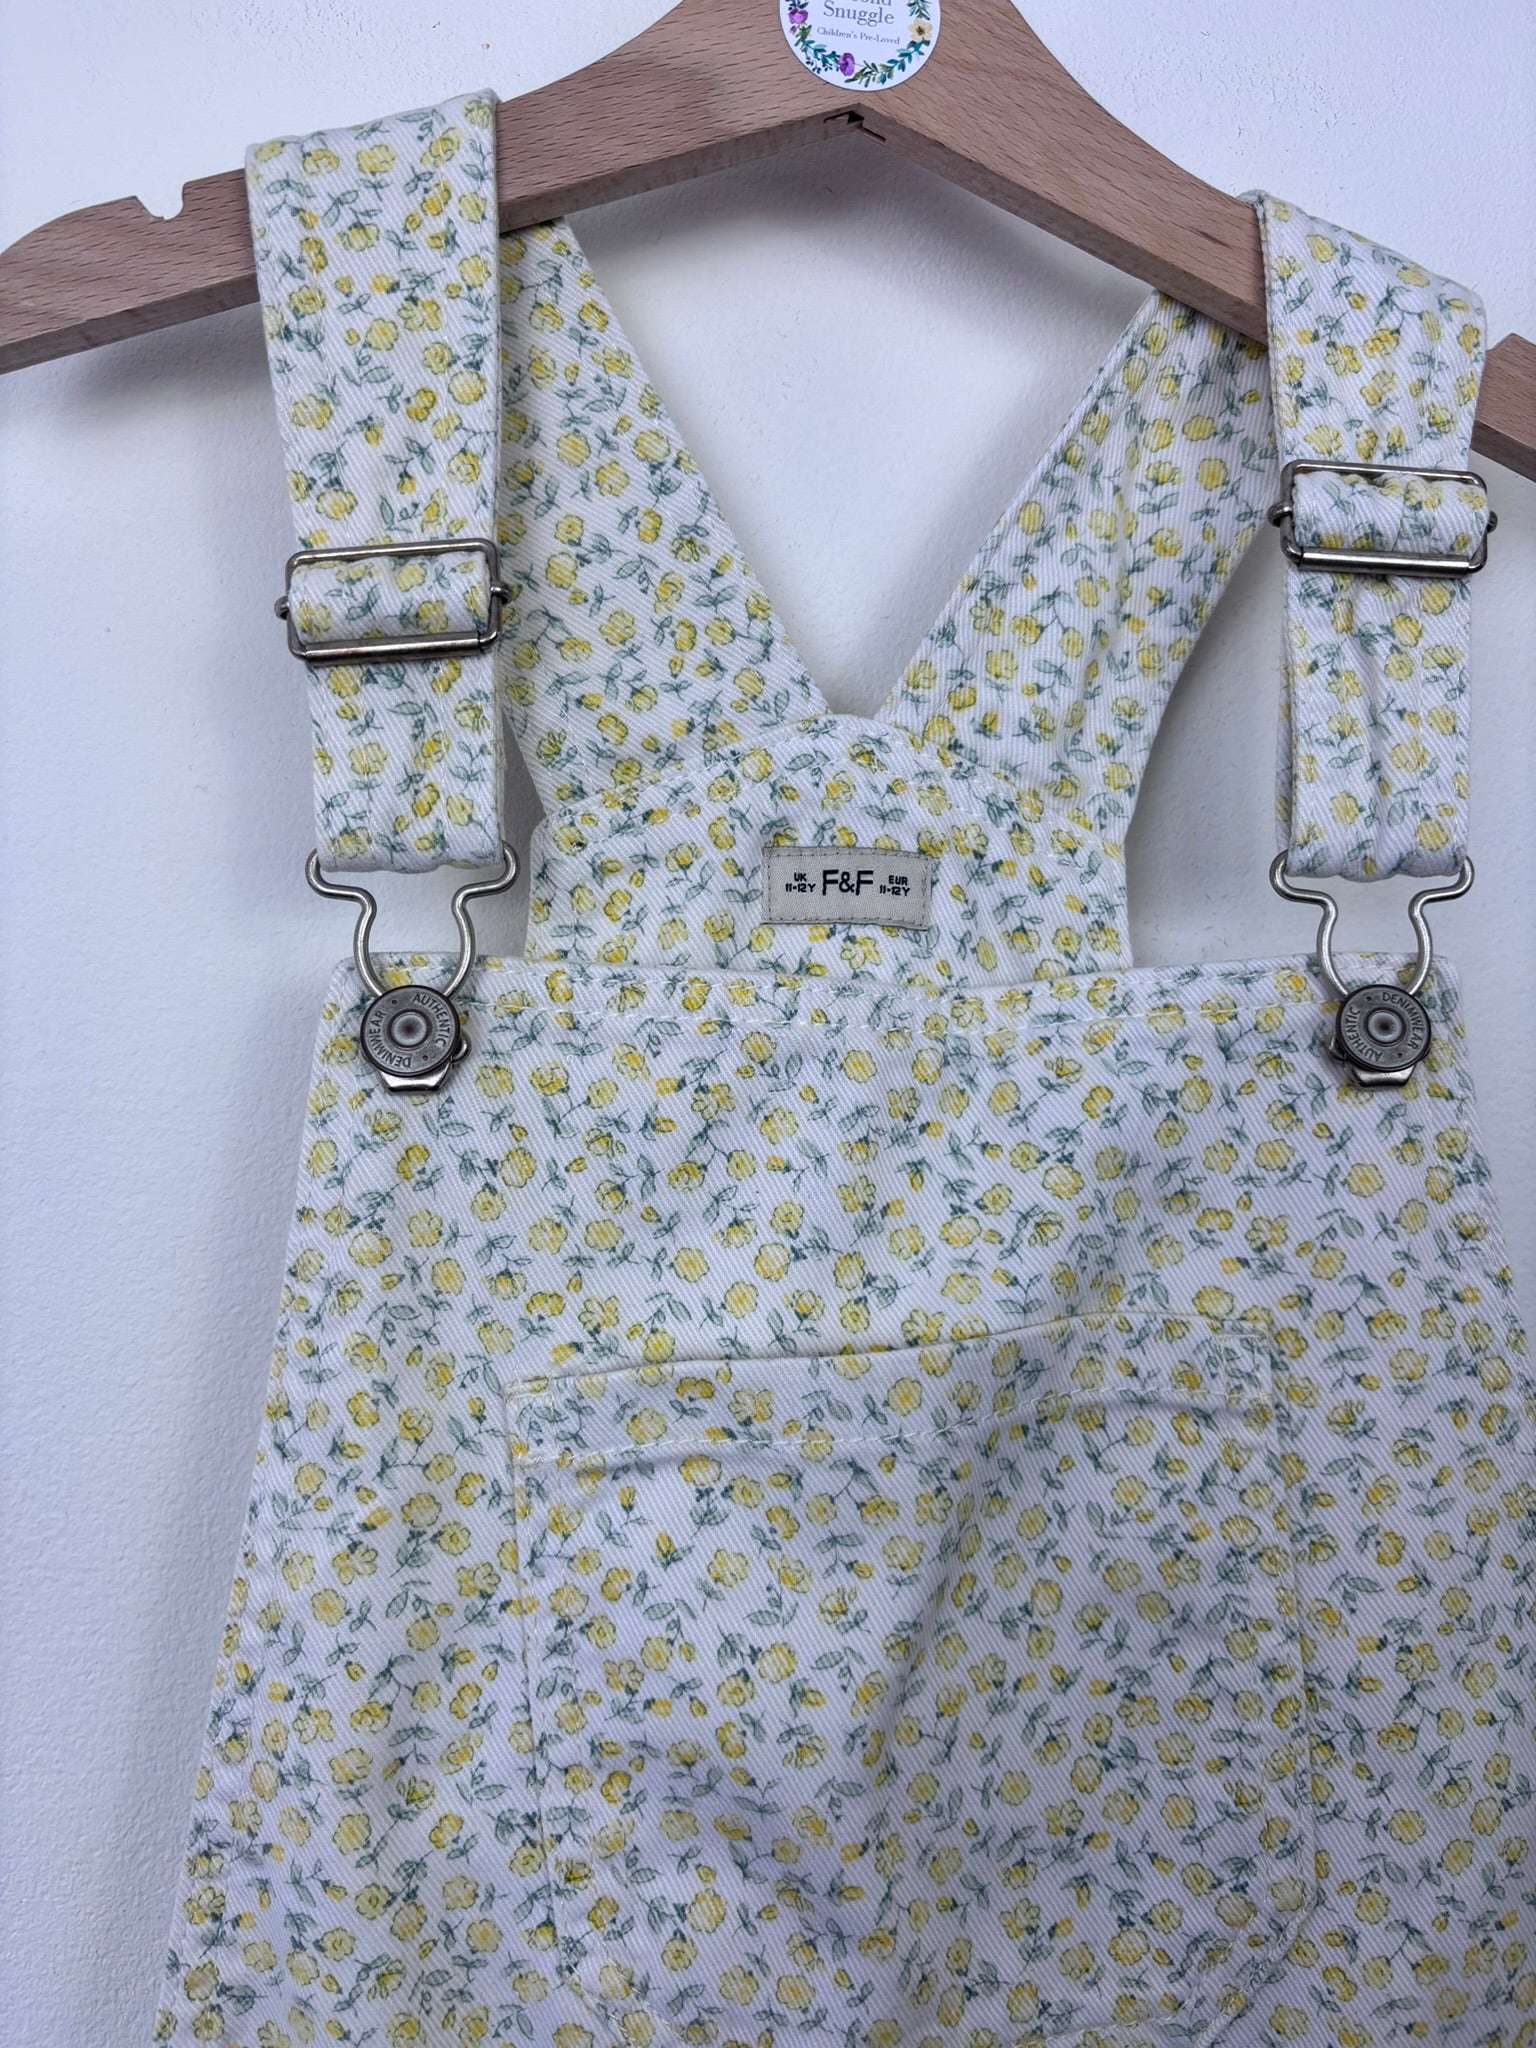 Fred & Flo 11-12 Years-Dungarees-Second Snuggle Preloved